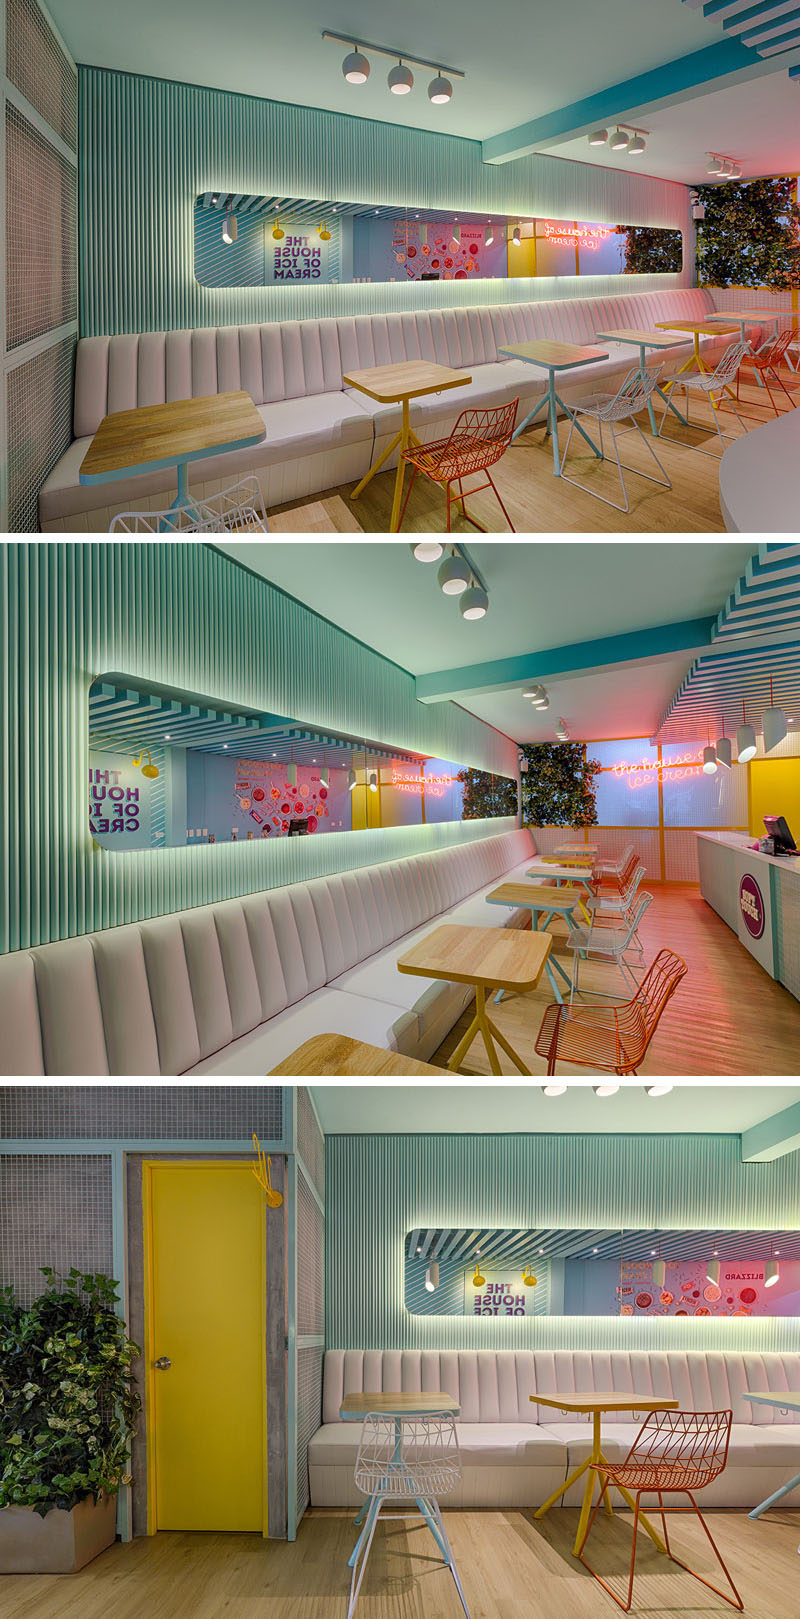 This modern ice cream store has a banquette of white seating with colorful tables and chairs that line the wall. Above the seating, there's a backlit long horizontal mirror that reflects the graphics and neon signage. #RetailDesign #IceCreamShop